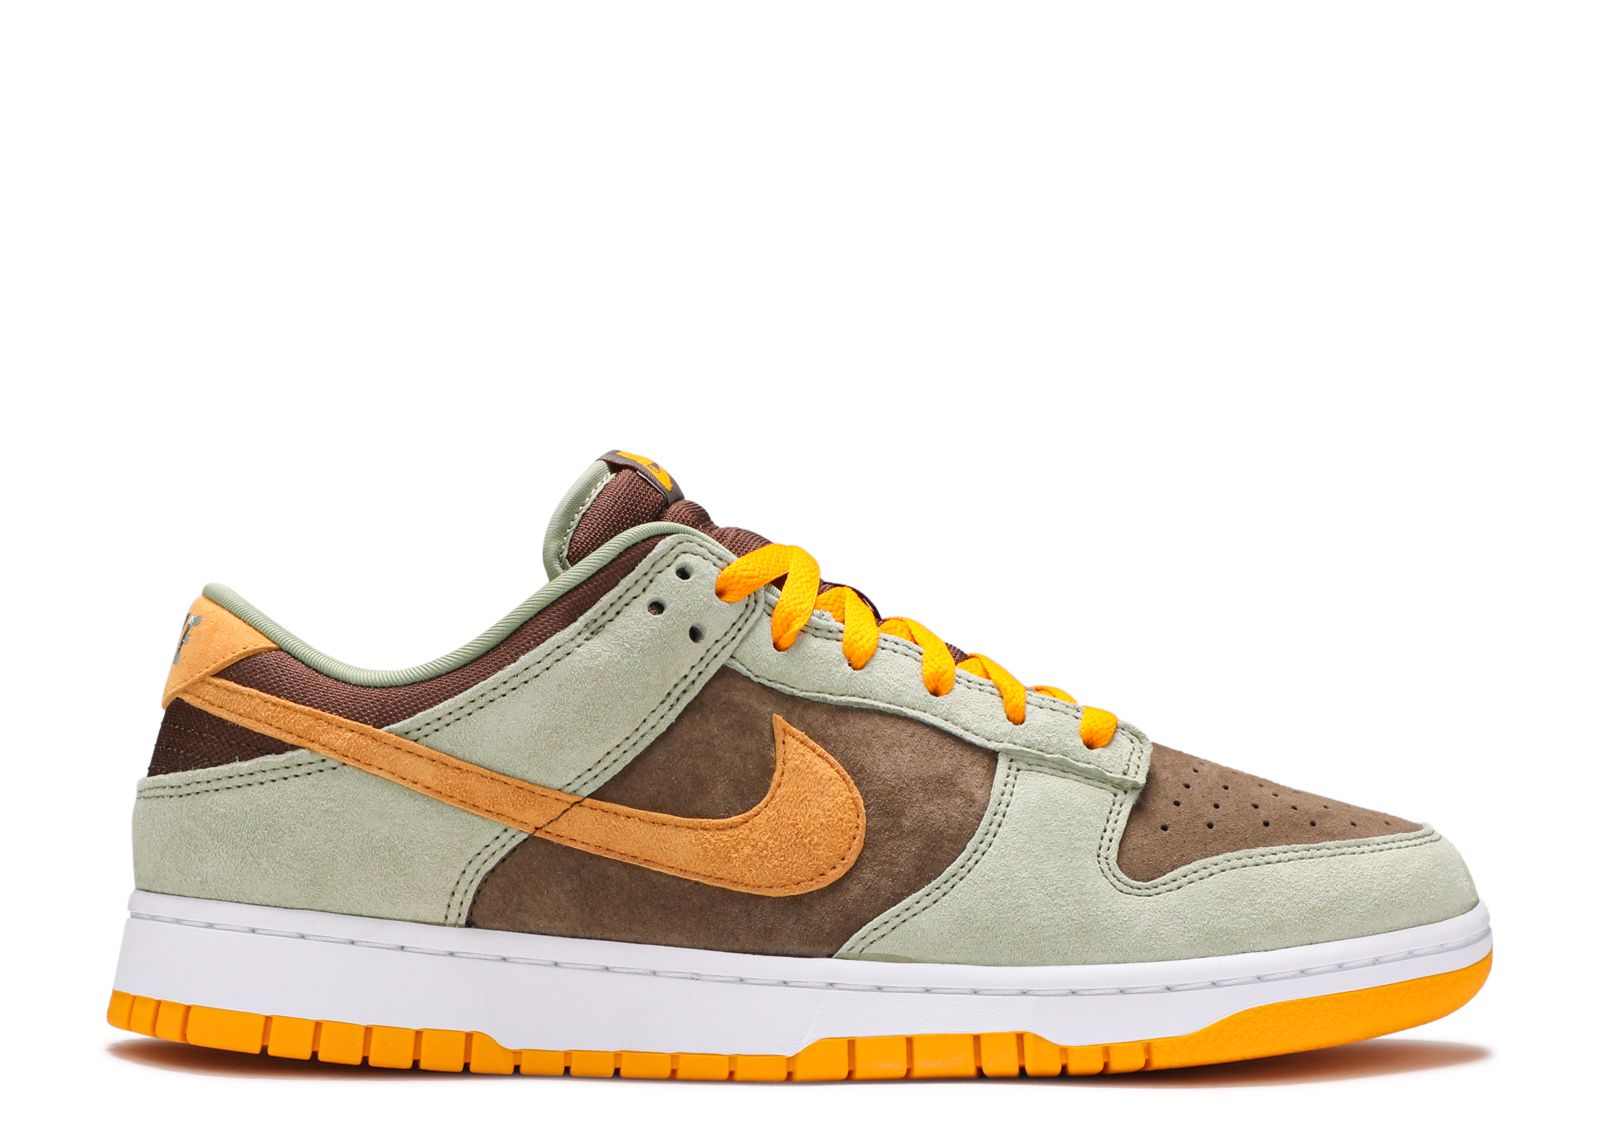 Nike Dunk Low Dusty Olive: Official Images & Release Info